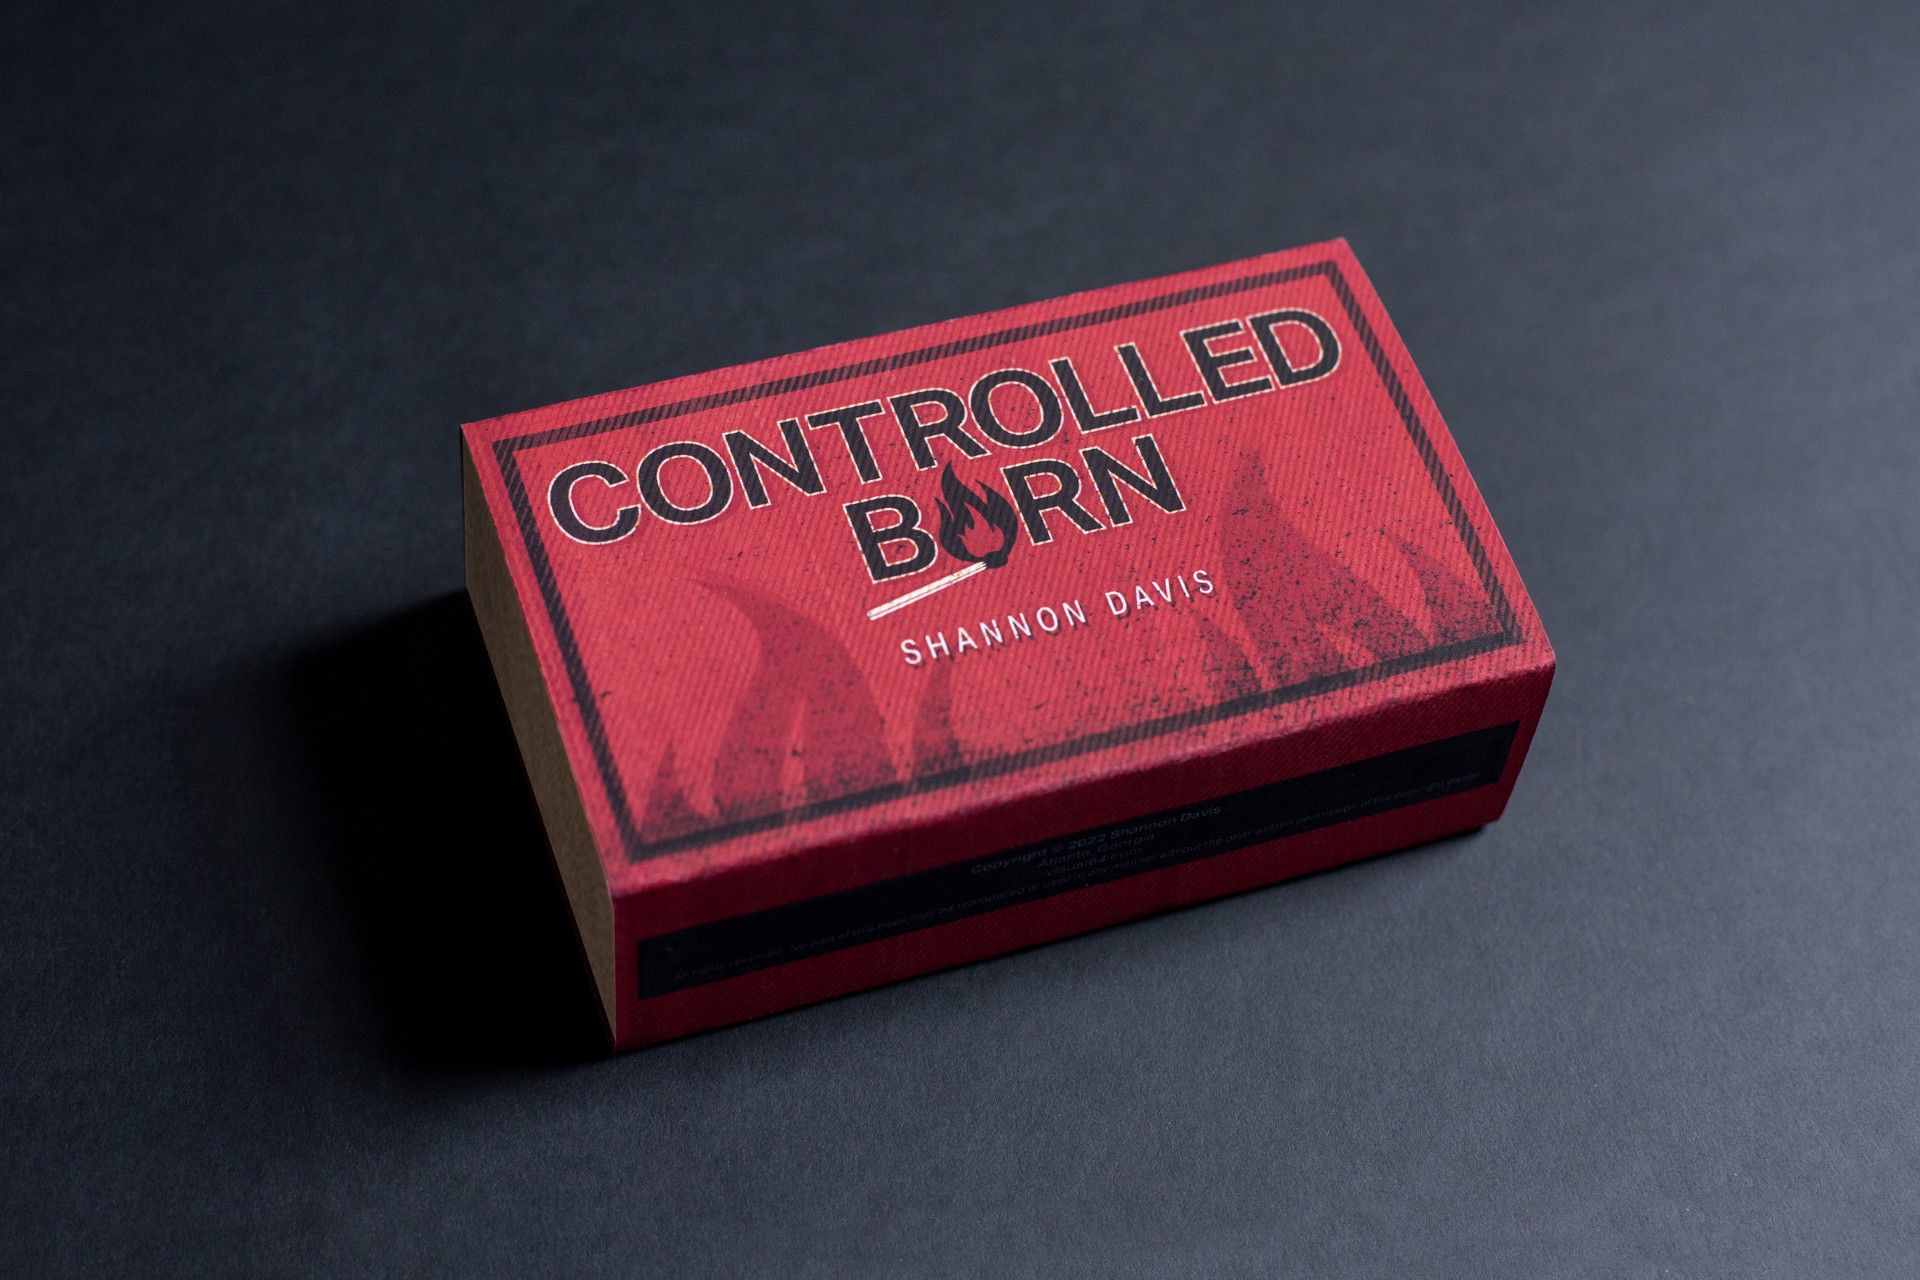 Controlled Burn - Book by Shannon Davis